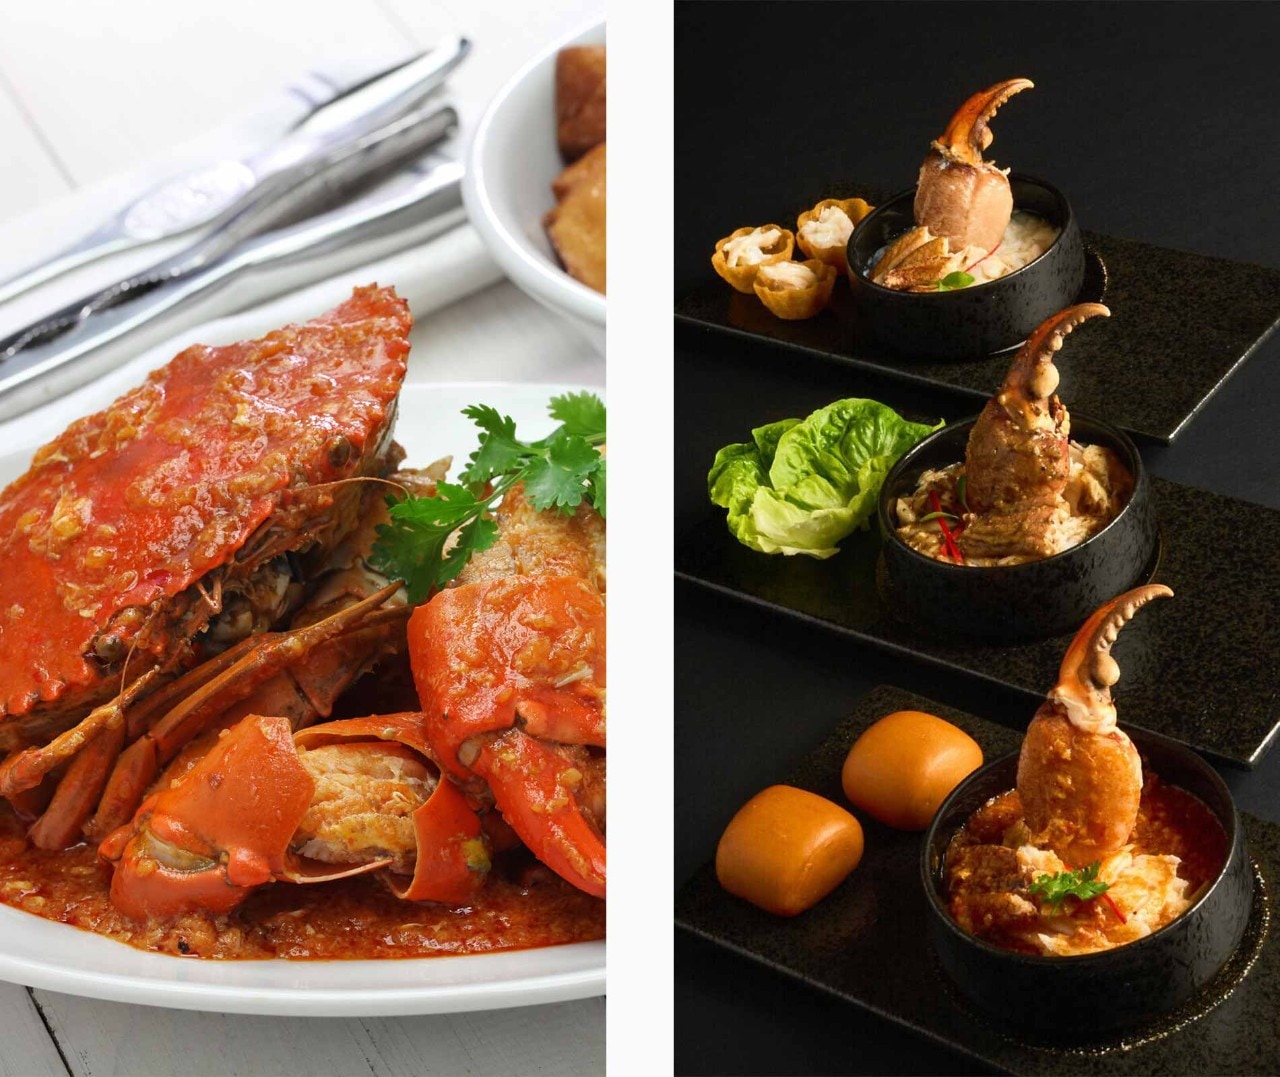 Chilli Crab, a popular must-try local dish in Singapore